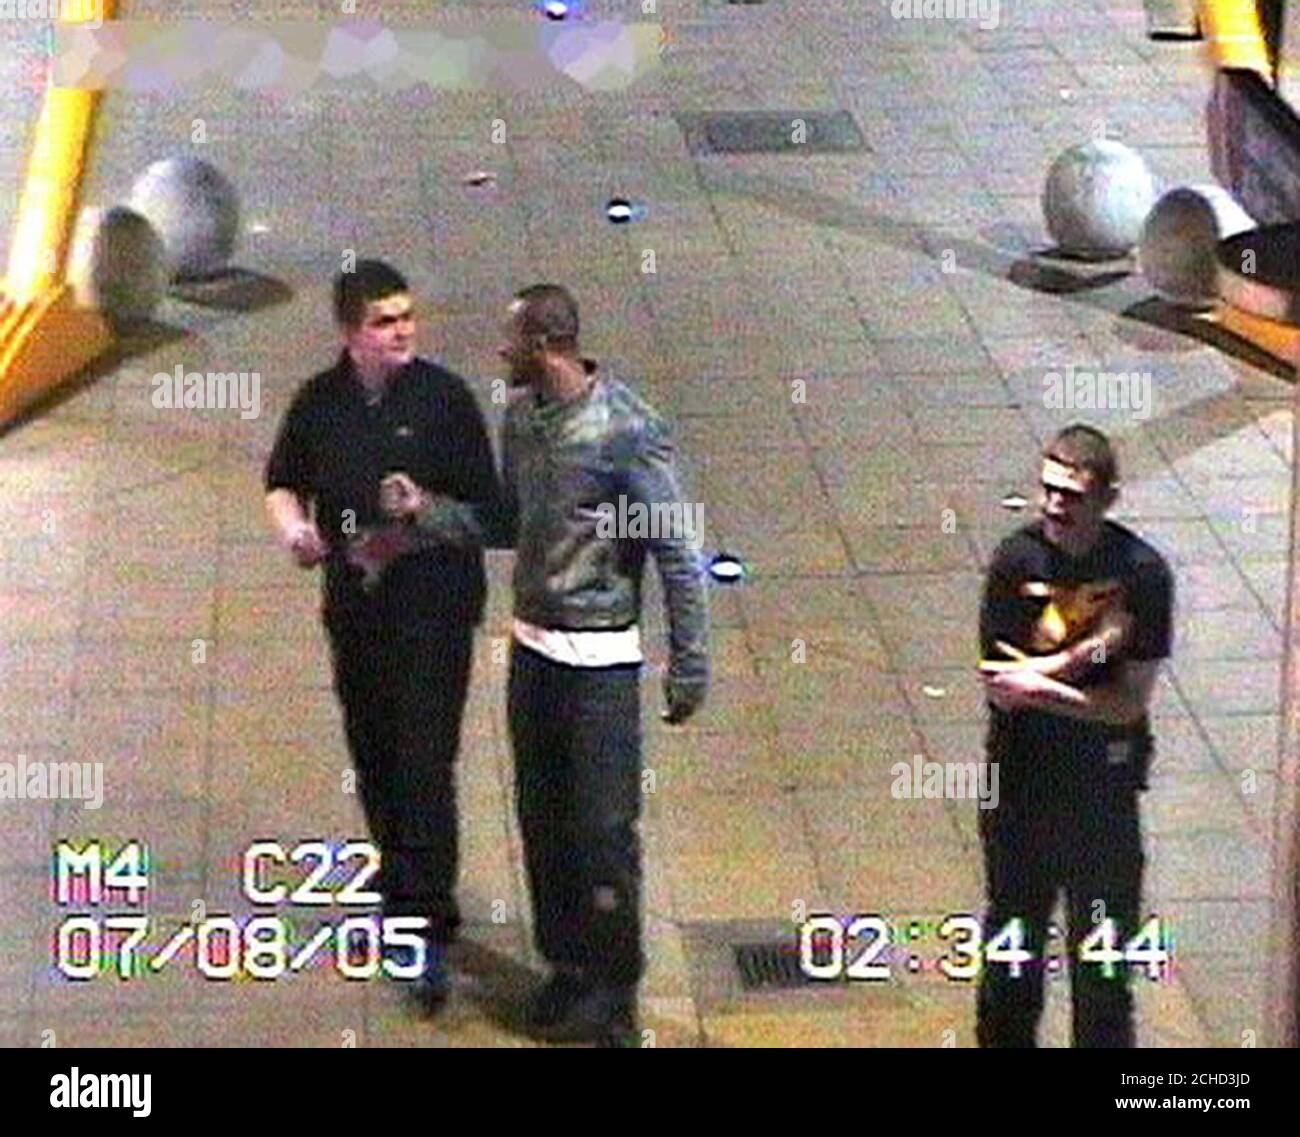 Metropolitan Police CCTV image dated 08/07/2005 of (left to right): Timmy Sullivan, 19, from Barking, Essex; Michael Onokah, 25, of Ilford, East London and Michael Lynch, 17, of Stratford, east London. Stock Photo